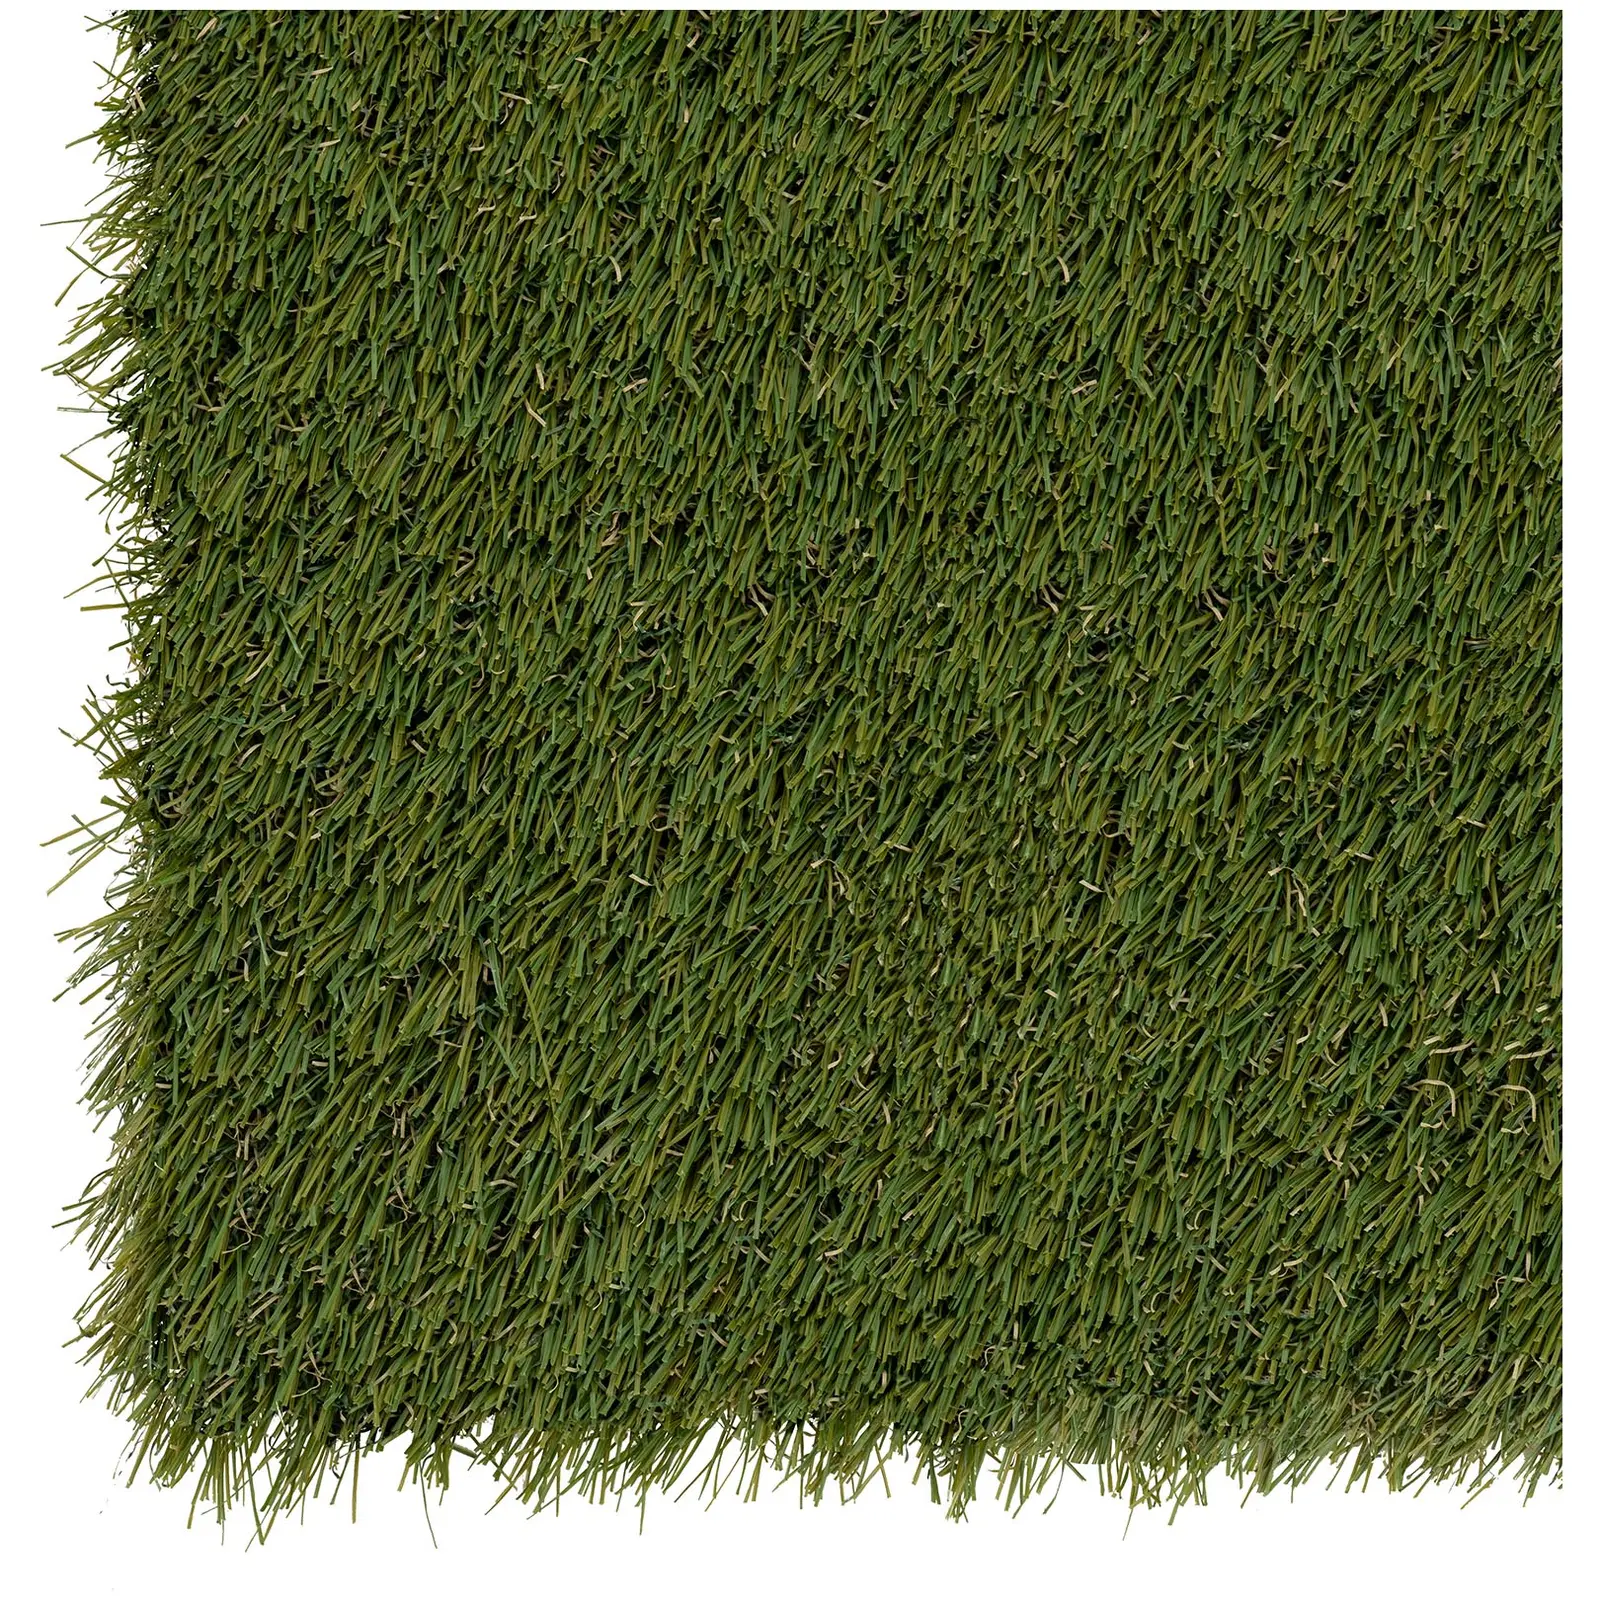 Artificial grass - 100 x 100 cm - Height: 30 mm - Stitch rate: 20/10 cm - UV-resistant